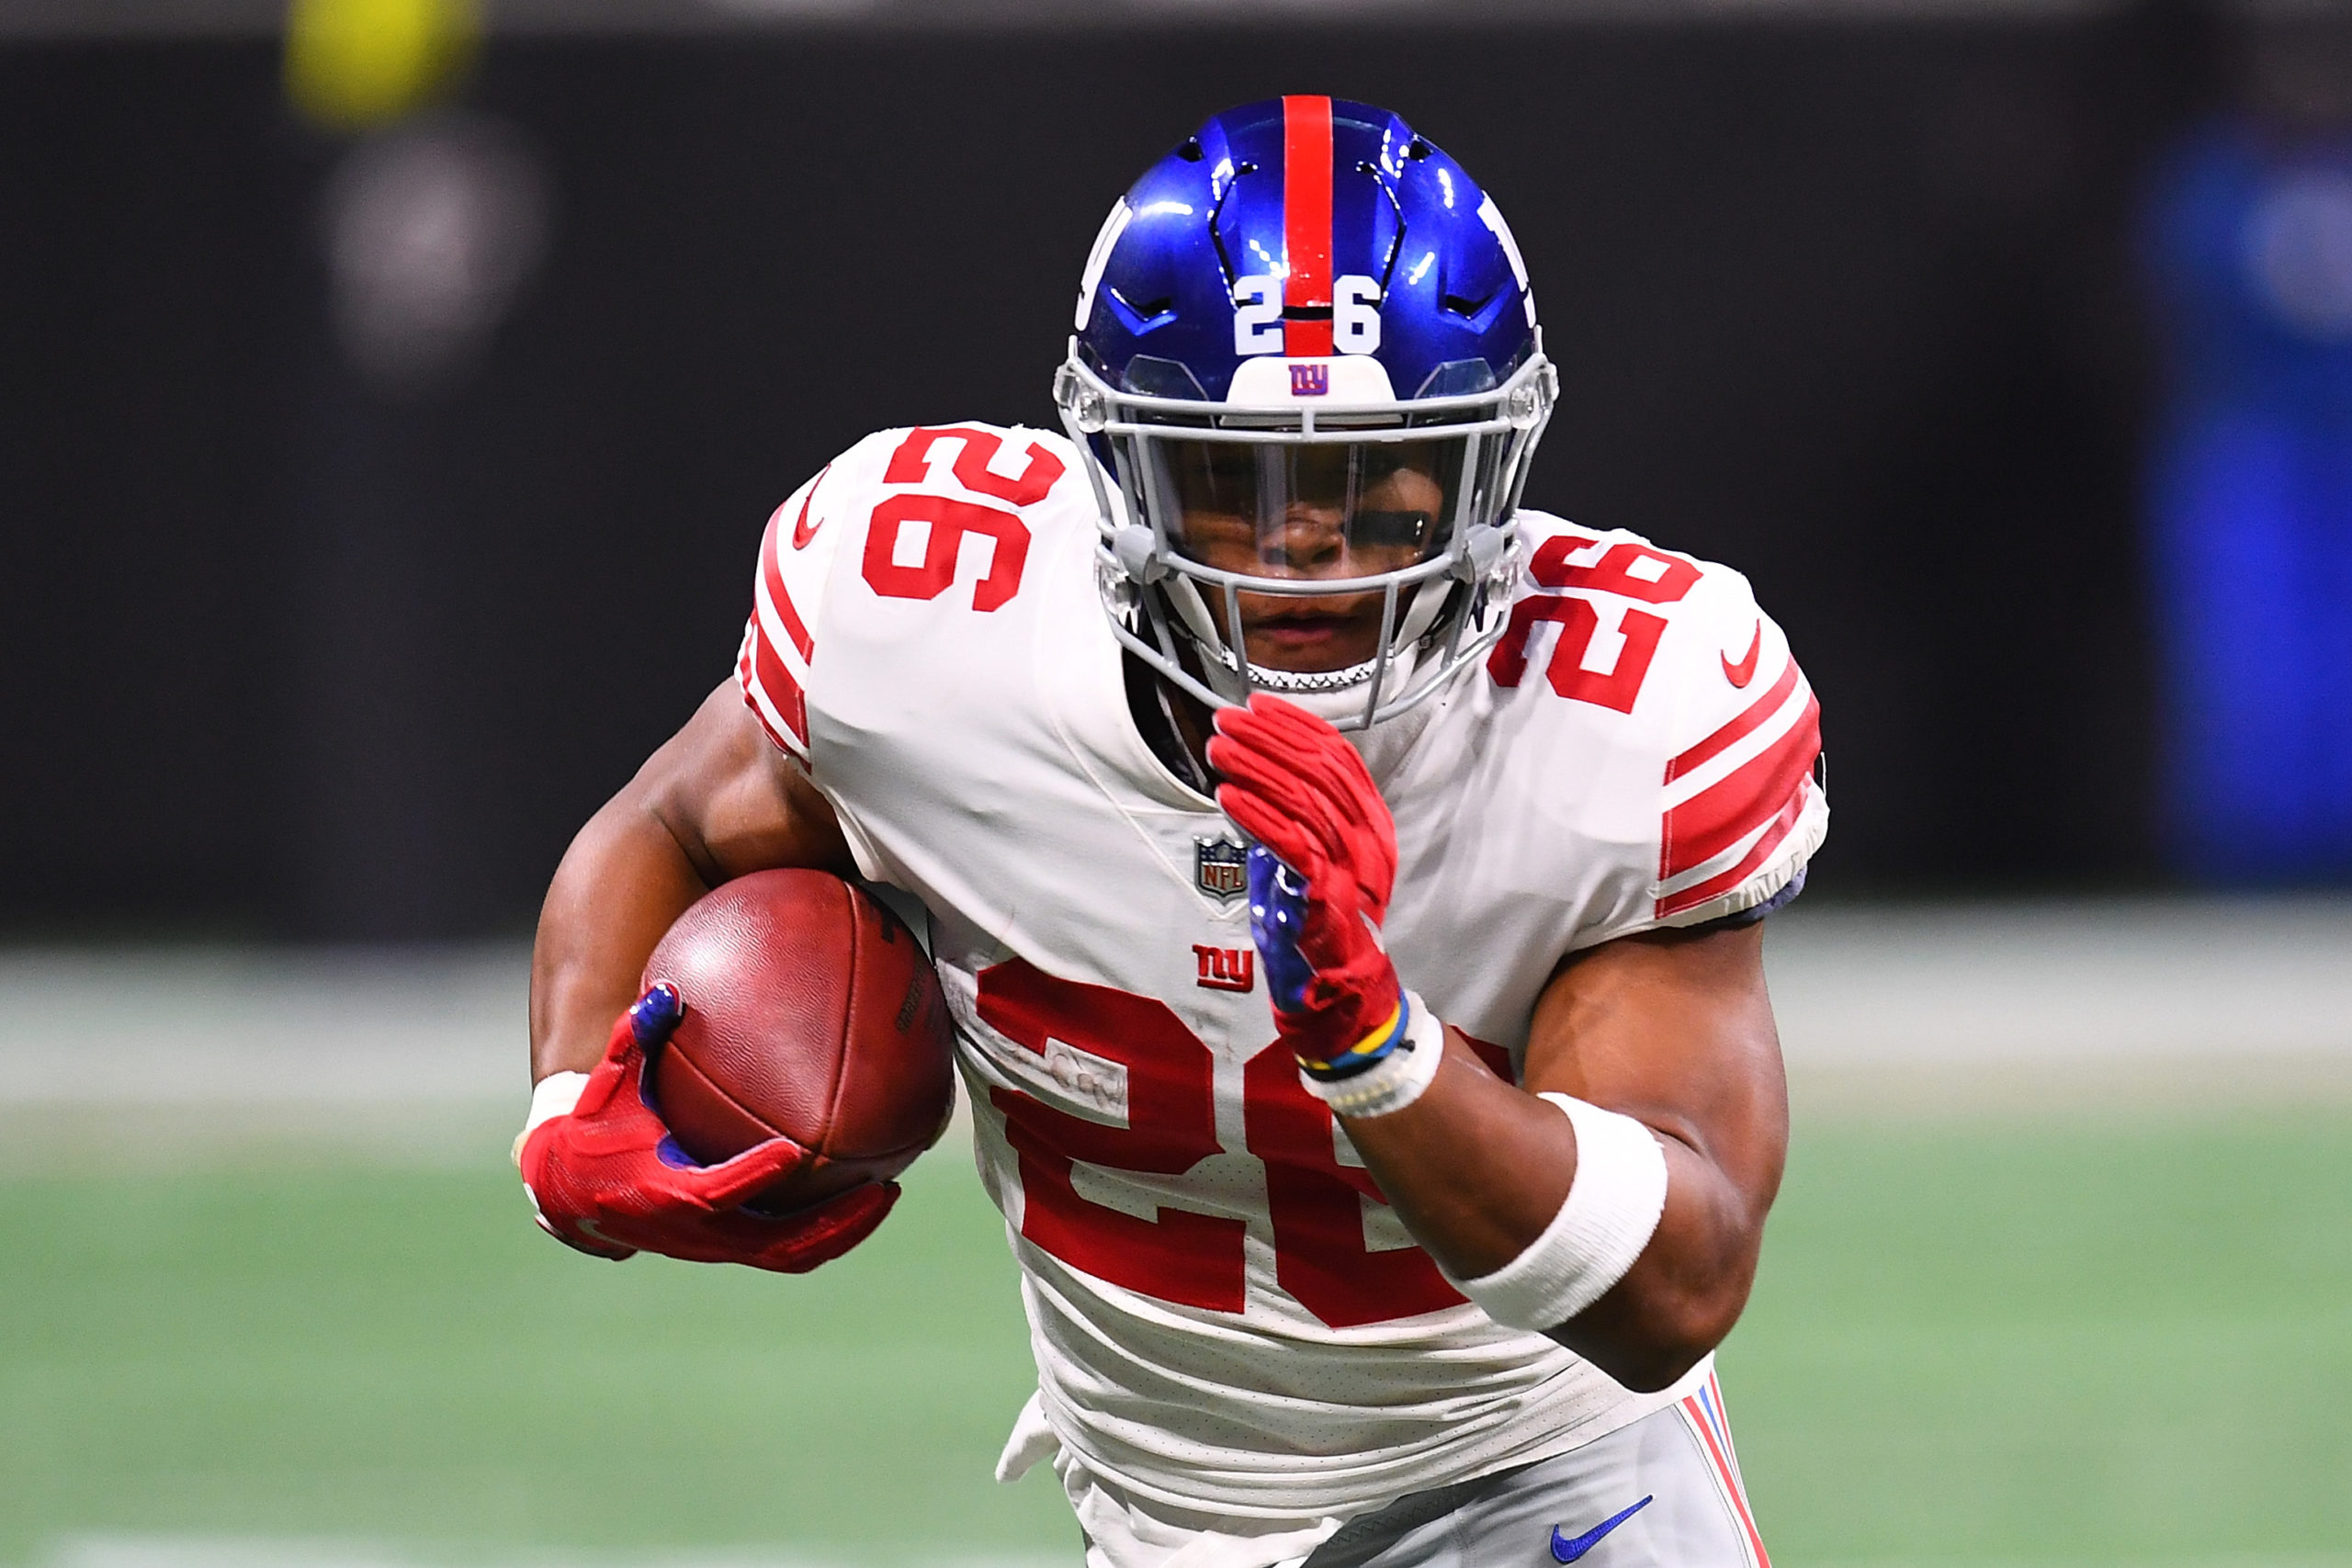 ATLANTA, GA - OCTOBER 22: Saquon Barkley #26 of the New York Giants runs the ball during the second quarter against the New York Giants at Mercedes-Benz Stadium on October 22, 2018 in Atlanta, Georgia. Scott Cunningham/Getty Images